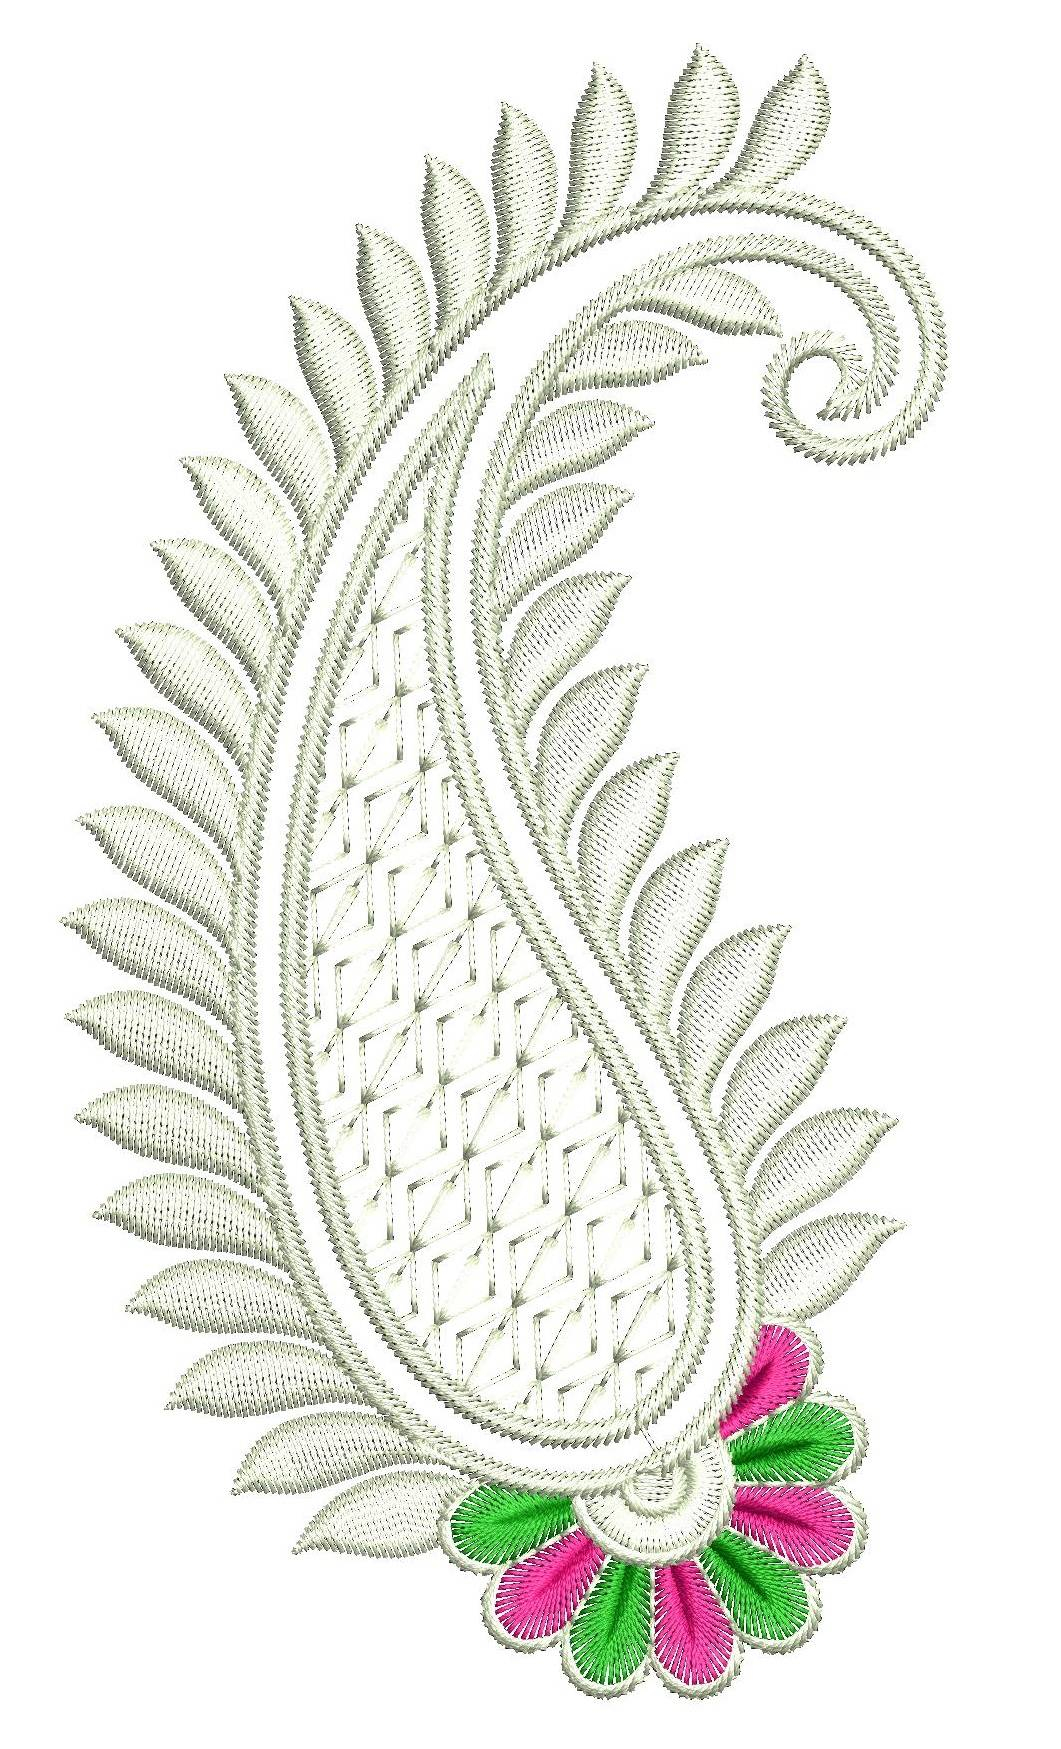 Paisley Embroidery Patterns Beautiful Paisley Embroidery Design